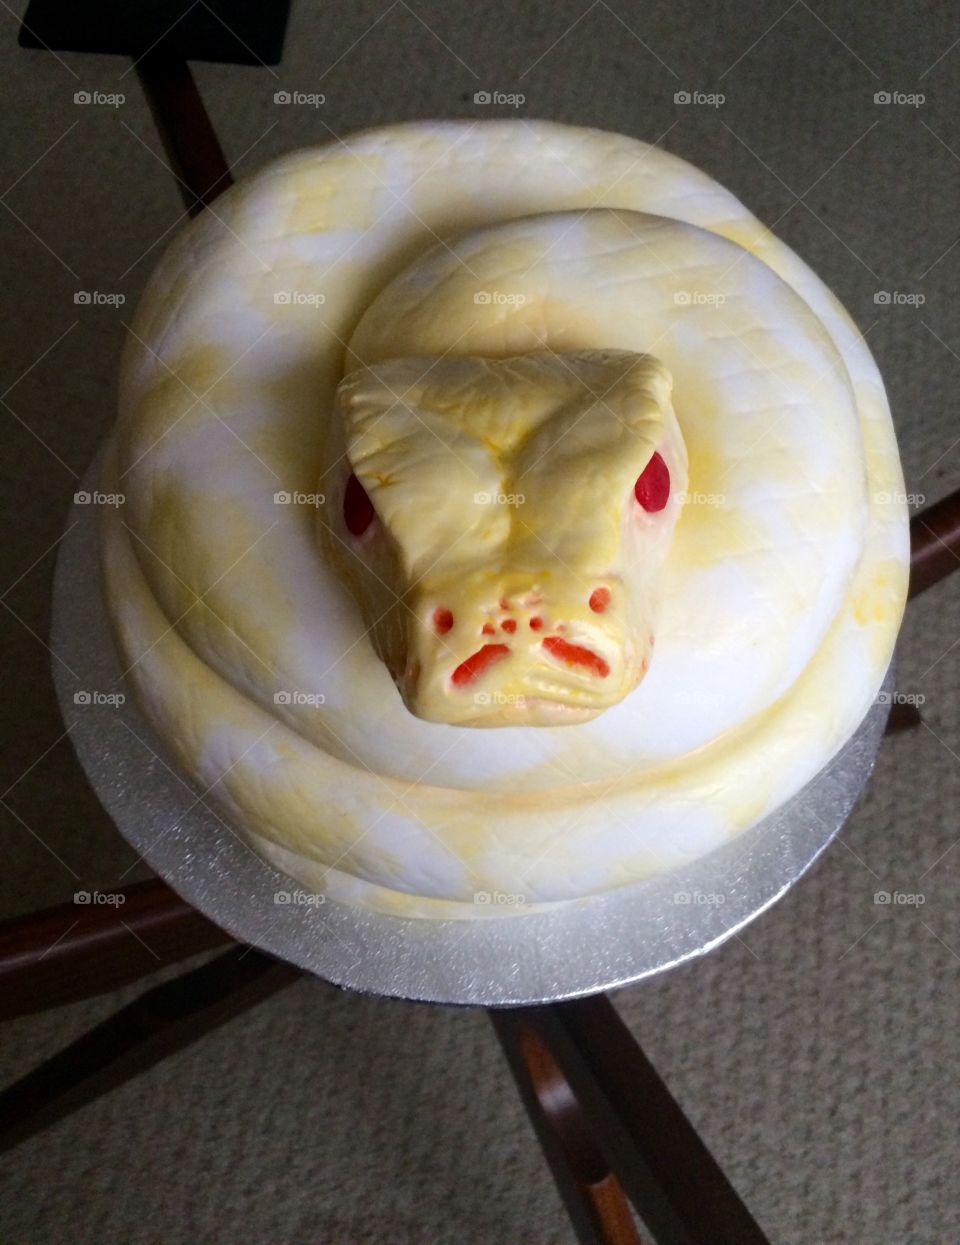 Snake cake - made by me